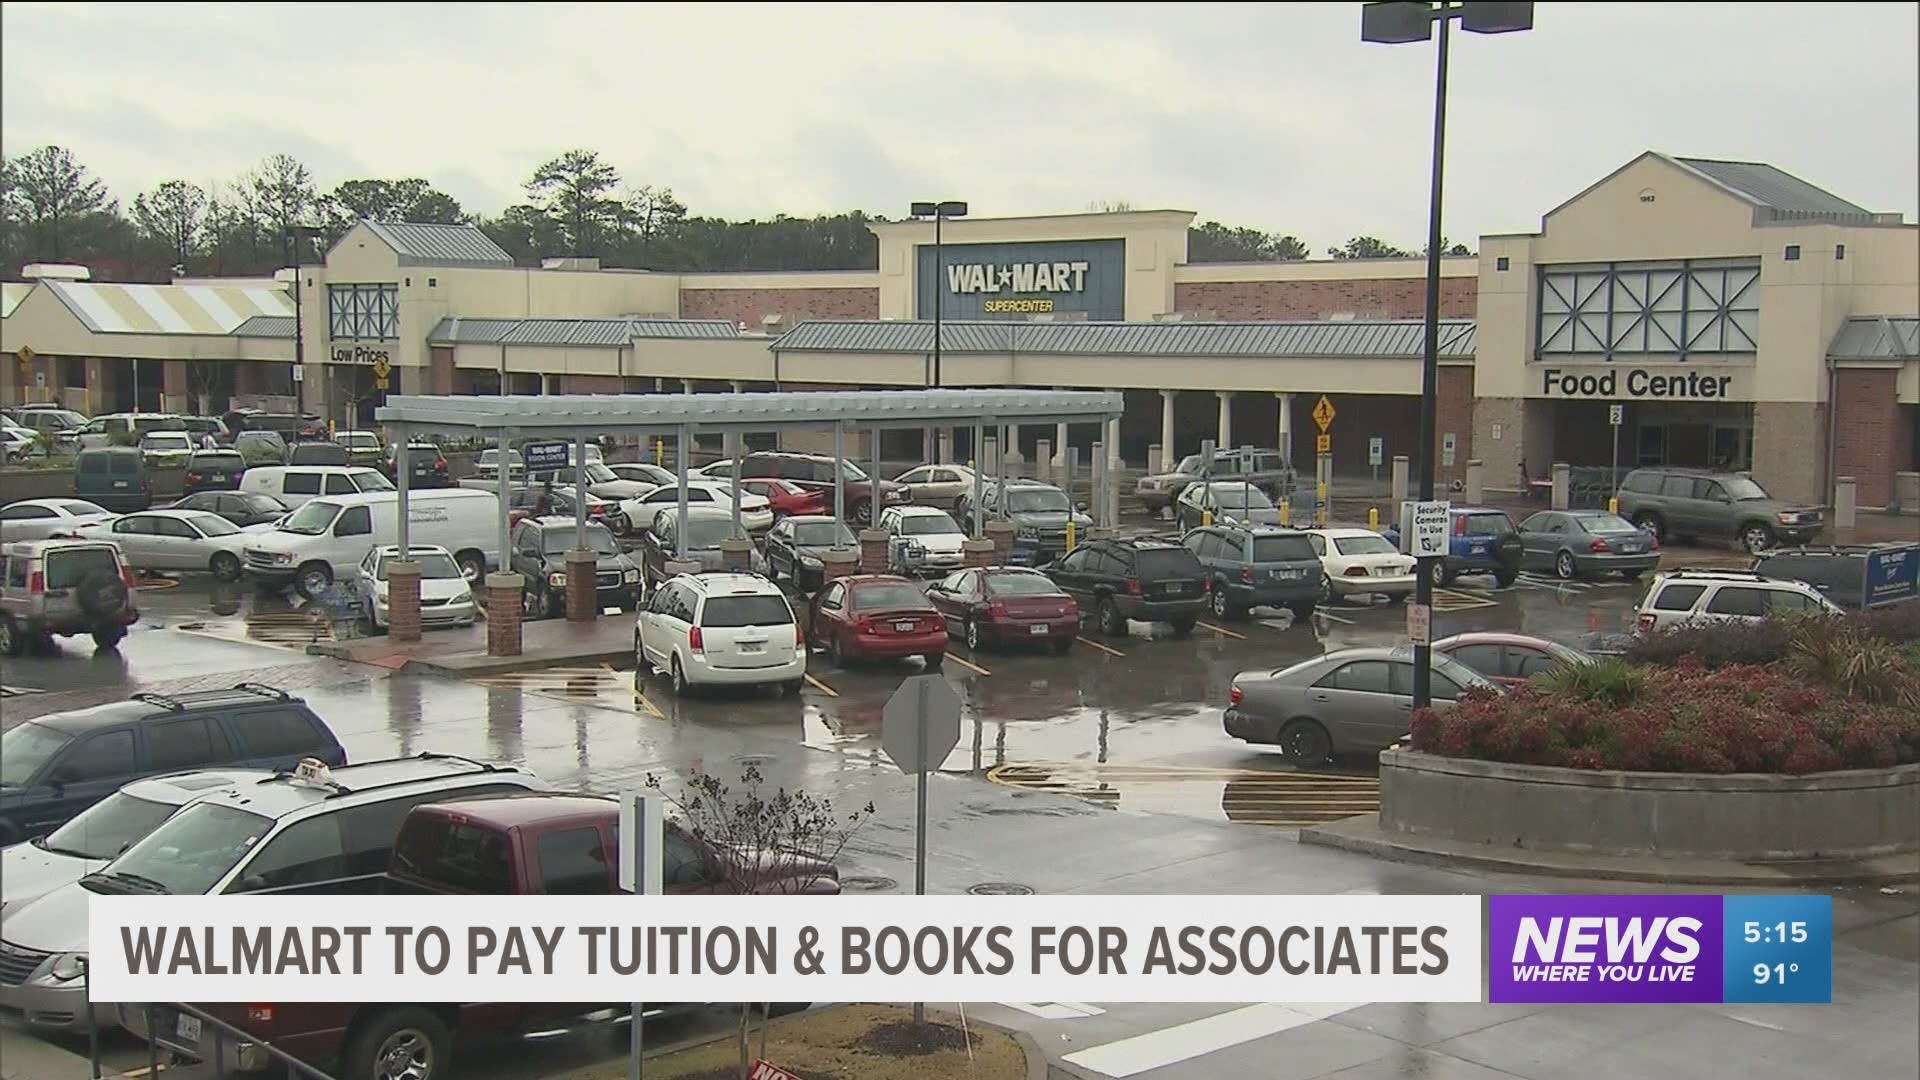 Starting August 16, the $1 a day fee will be removed for associates, making all education programs paid for by Walmart.